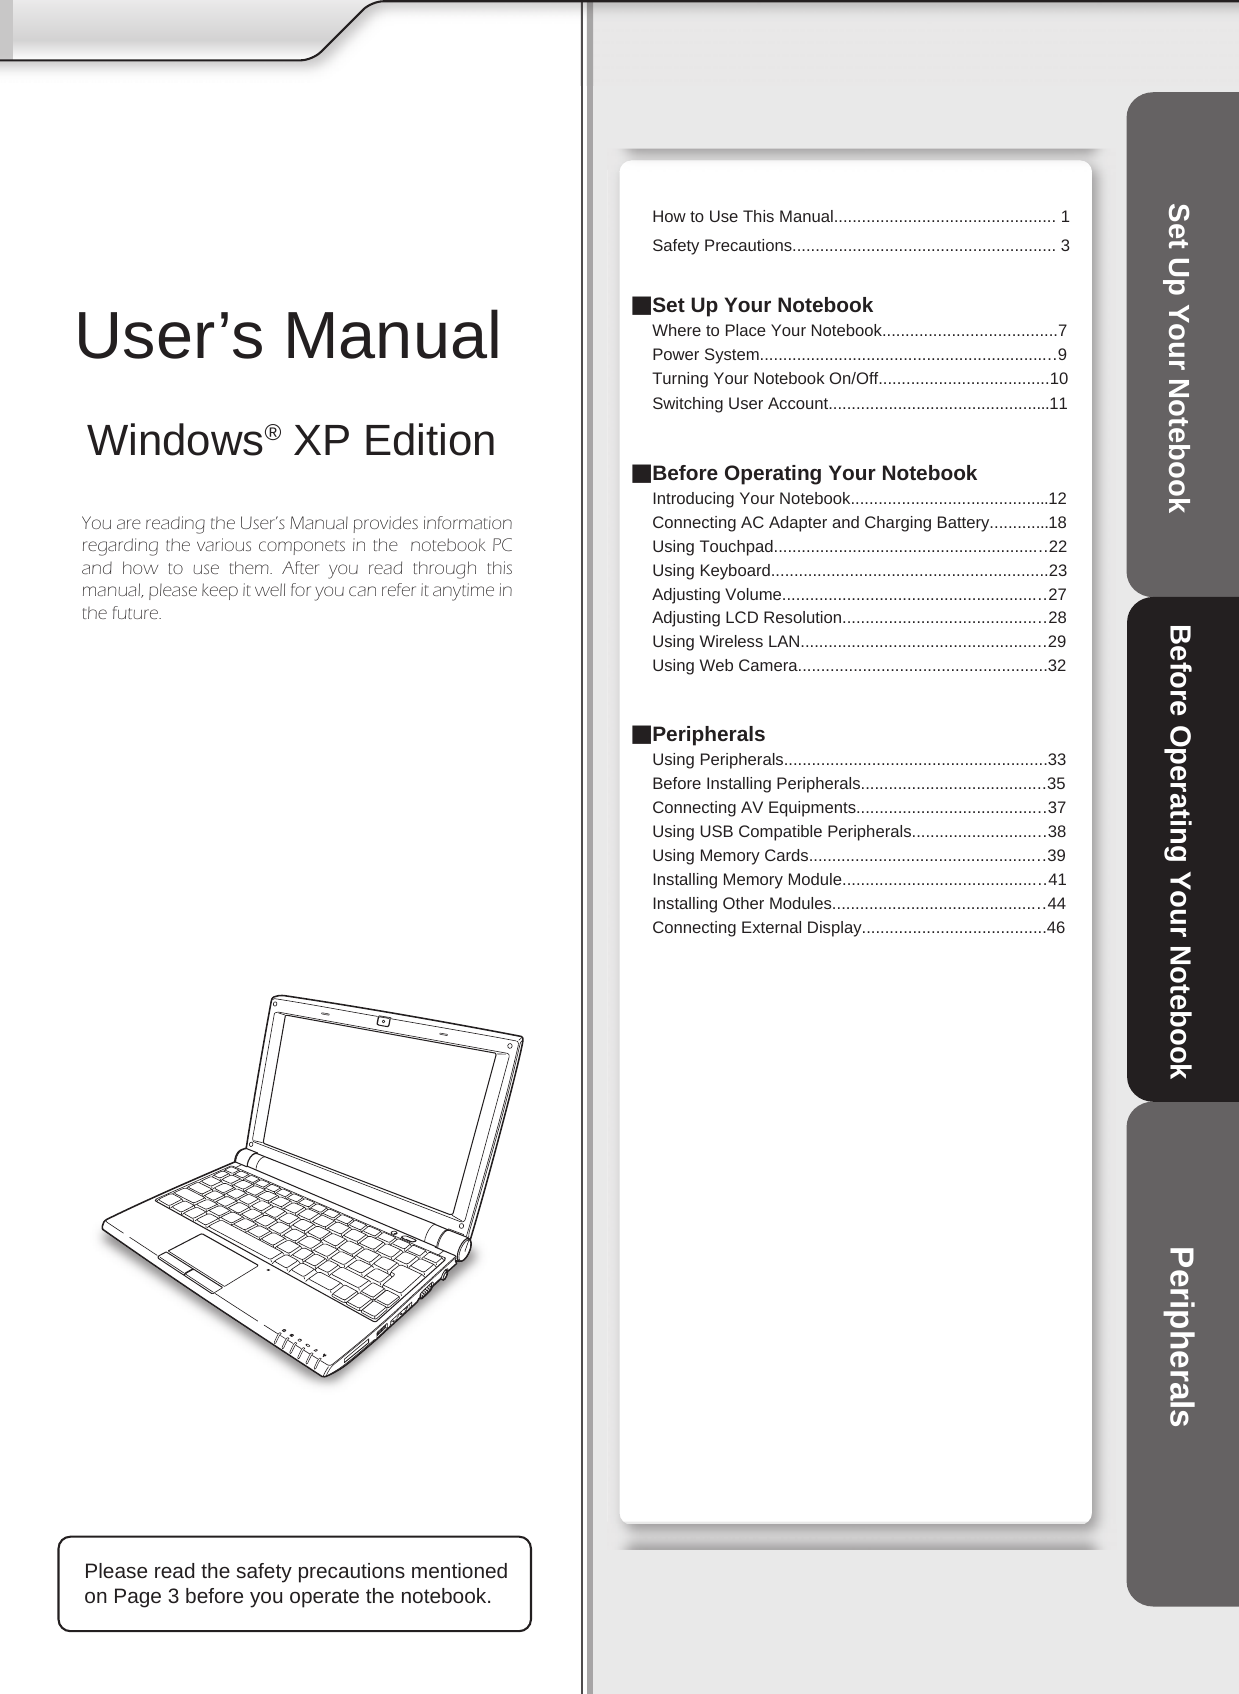    How to Use This Manual................................................ 1Safety Precautions......................................................... 3■Set Up Your Notebook Where to Place Your Notebook......................................7Power System................................................................9Turning Your Notebook On/Off.....................................10Switching User Account................................................11■Before Operating Your NotebookIntroducing Your Notebook...........................................12Connecting AC Adapter and Charging Battery.............18Using Touchpad...........................................................22Using Keyboard............................................................23Adjusting Volume.........................................................27Adjusting LCD Resolution............................................28Using Wireless LAN.....................................................29Using Web Camera......................................................32■PeripheralsUsing Peripherals.........................................................33Before Installing Peripherals........................................35Connecting AV Equipments.........................................37Using USB Compatible Peripherals.............................38Using Memory Cards...................................................39Installing Memory Module............................................41Installing Other Modules..............................................44Connecting External Display........................................46Please read the safety precautions mentioned on Page 3 before you operate the notebook.User’s ManualWindows® XP EditionSet Up Your Notebook Before Operating Your Notebook PeripheralsYou are reading the User’s Manual provides information regarding the various componets in the  notebook PC and  how  to  use  them.  After  you  read  through  this manual, please keep it well for you can refer it anytime in the future.